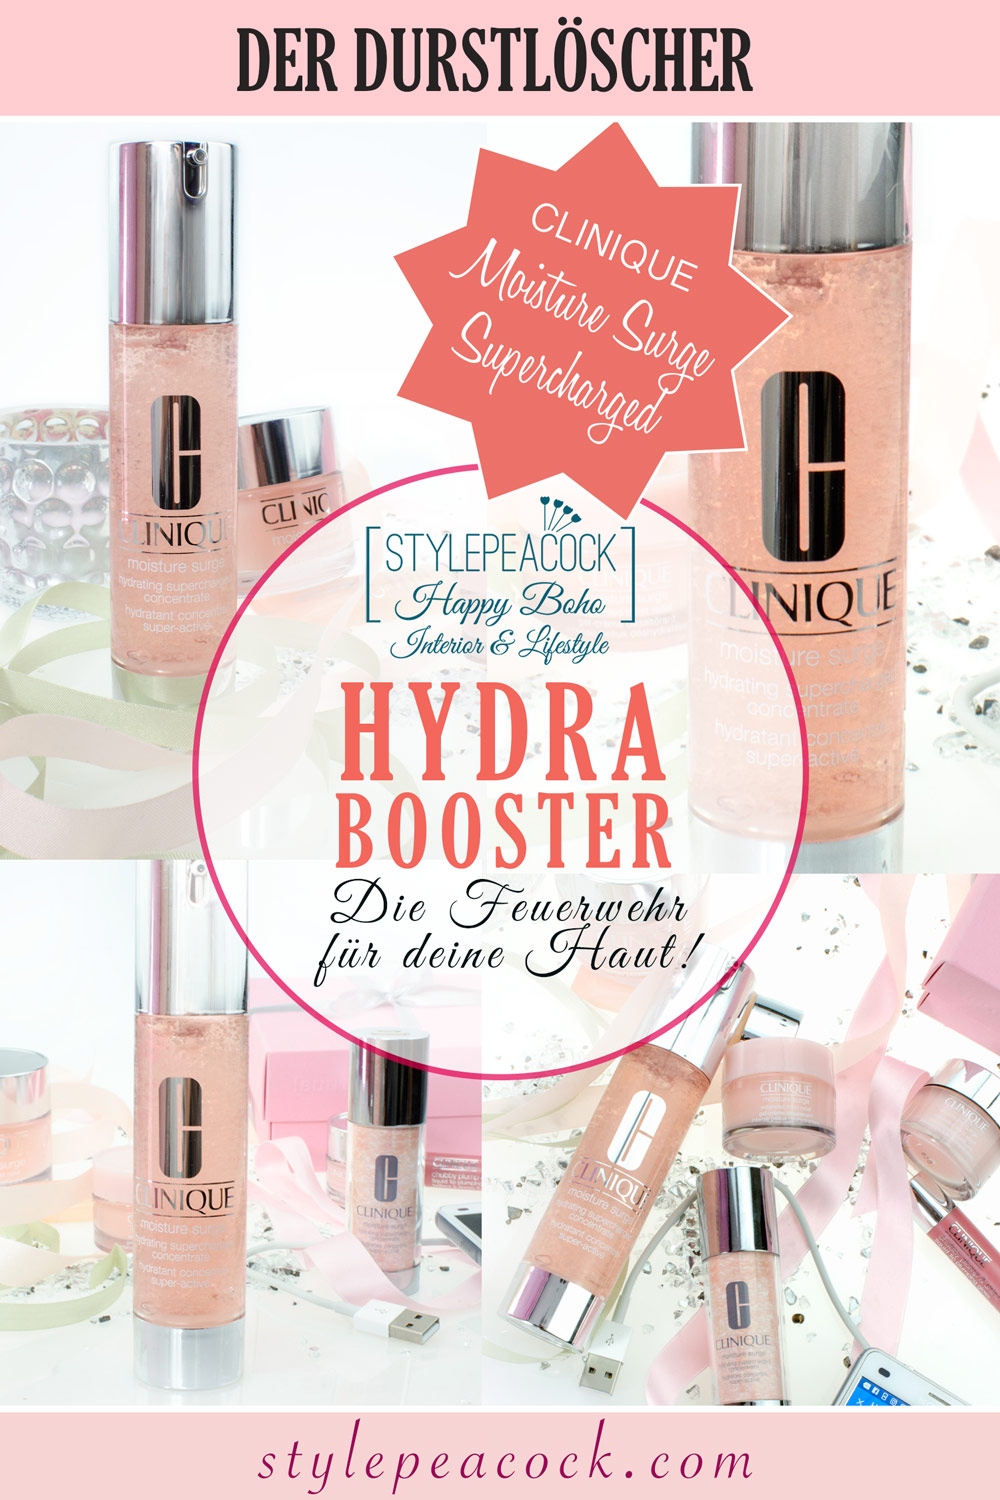 Clinique Moisture Surge Supercharged Hyra Booster